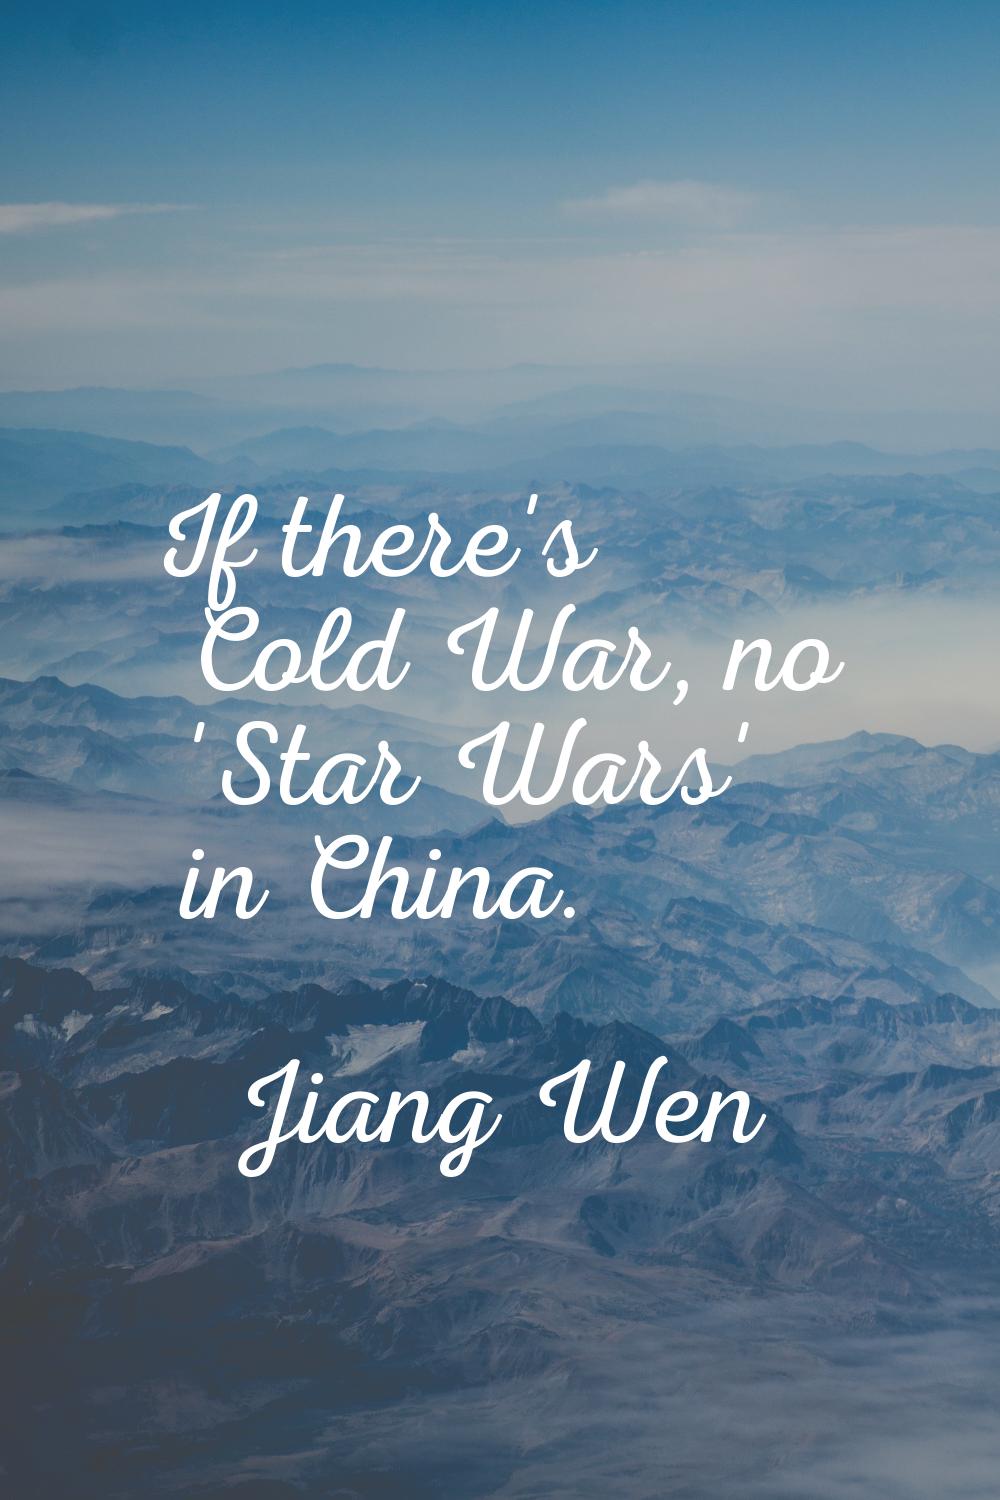 If there's Cold War, no 'Star Wars' in China.